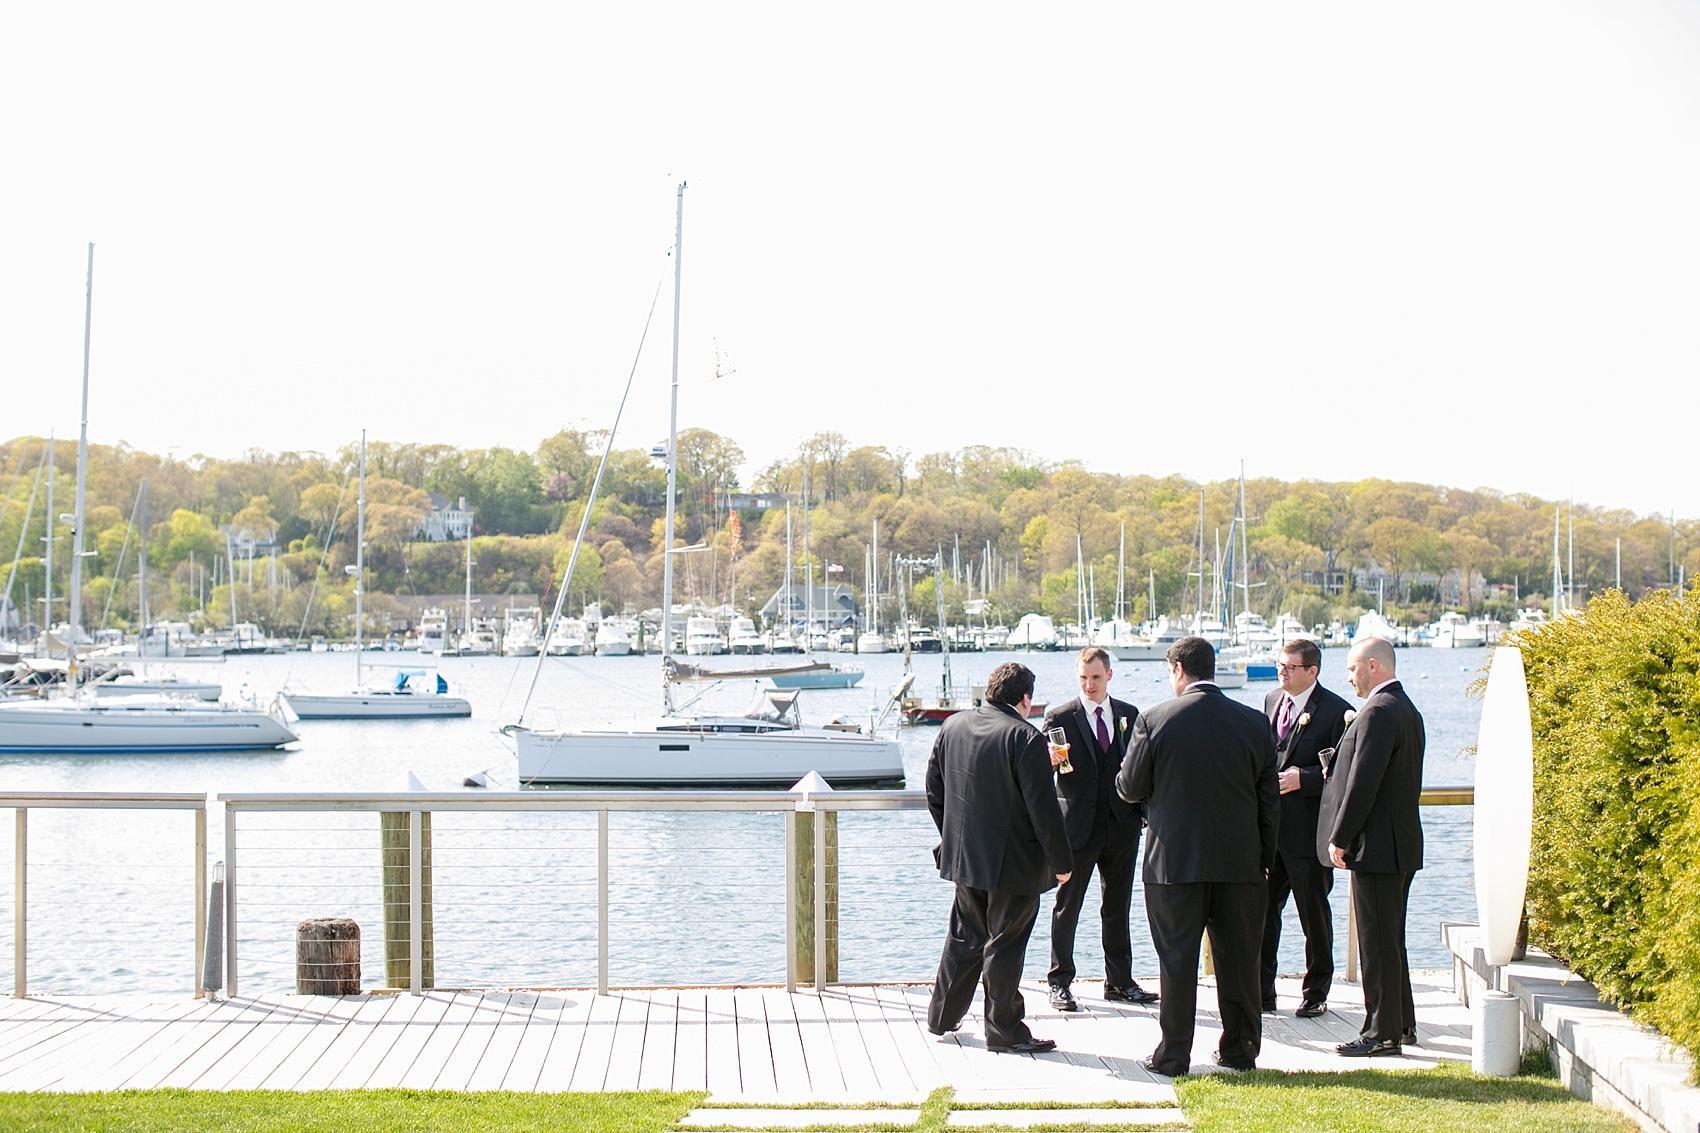 Photos by Mikkel Paige Photography for a wedding at Harbor Club on Long Island. The groomsmen hang out by the waterfront.